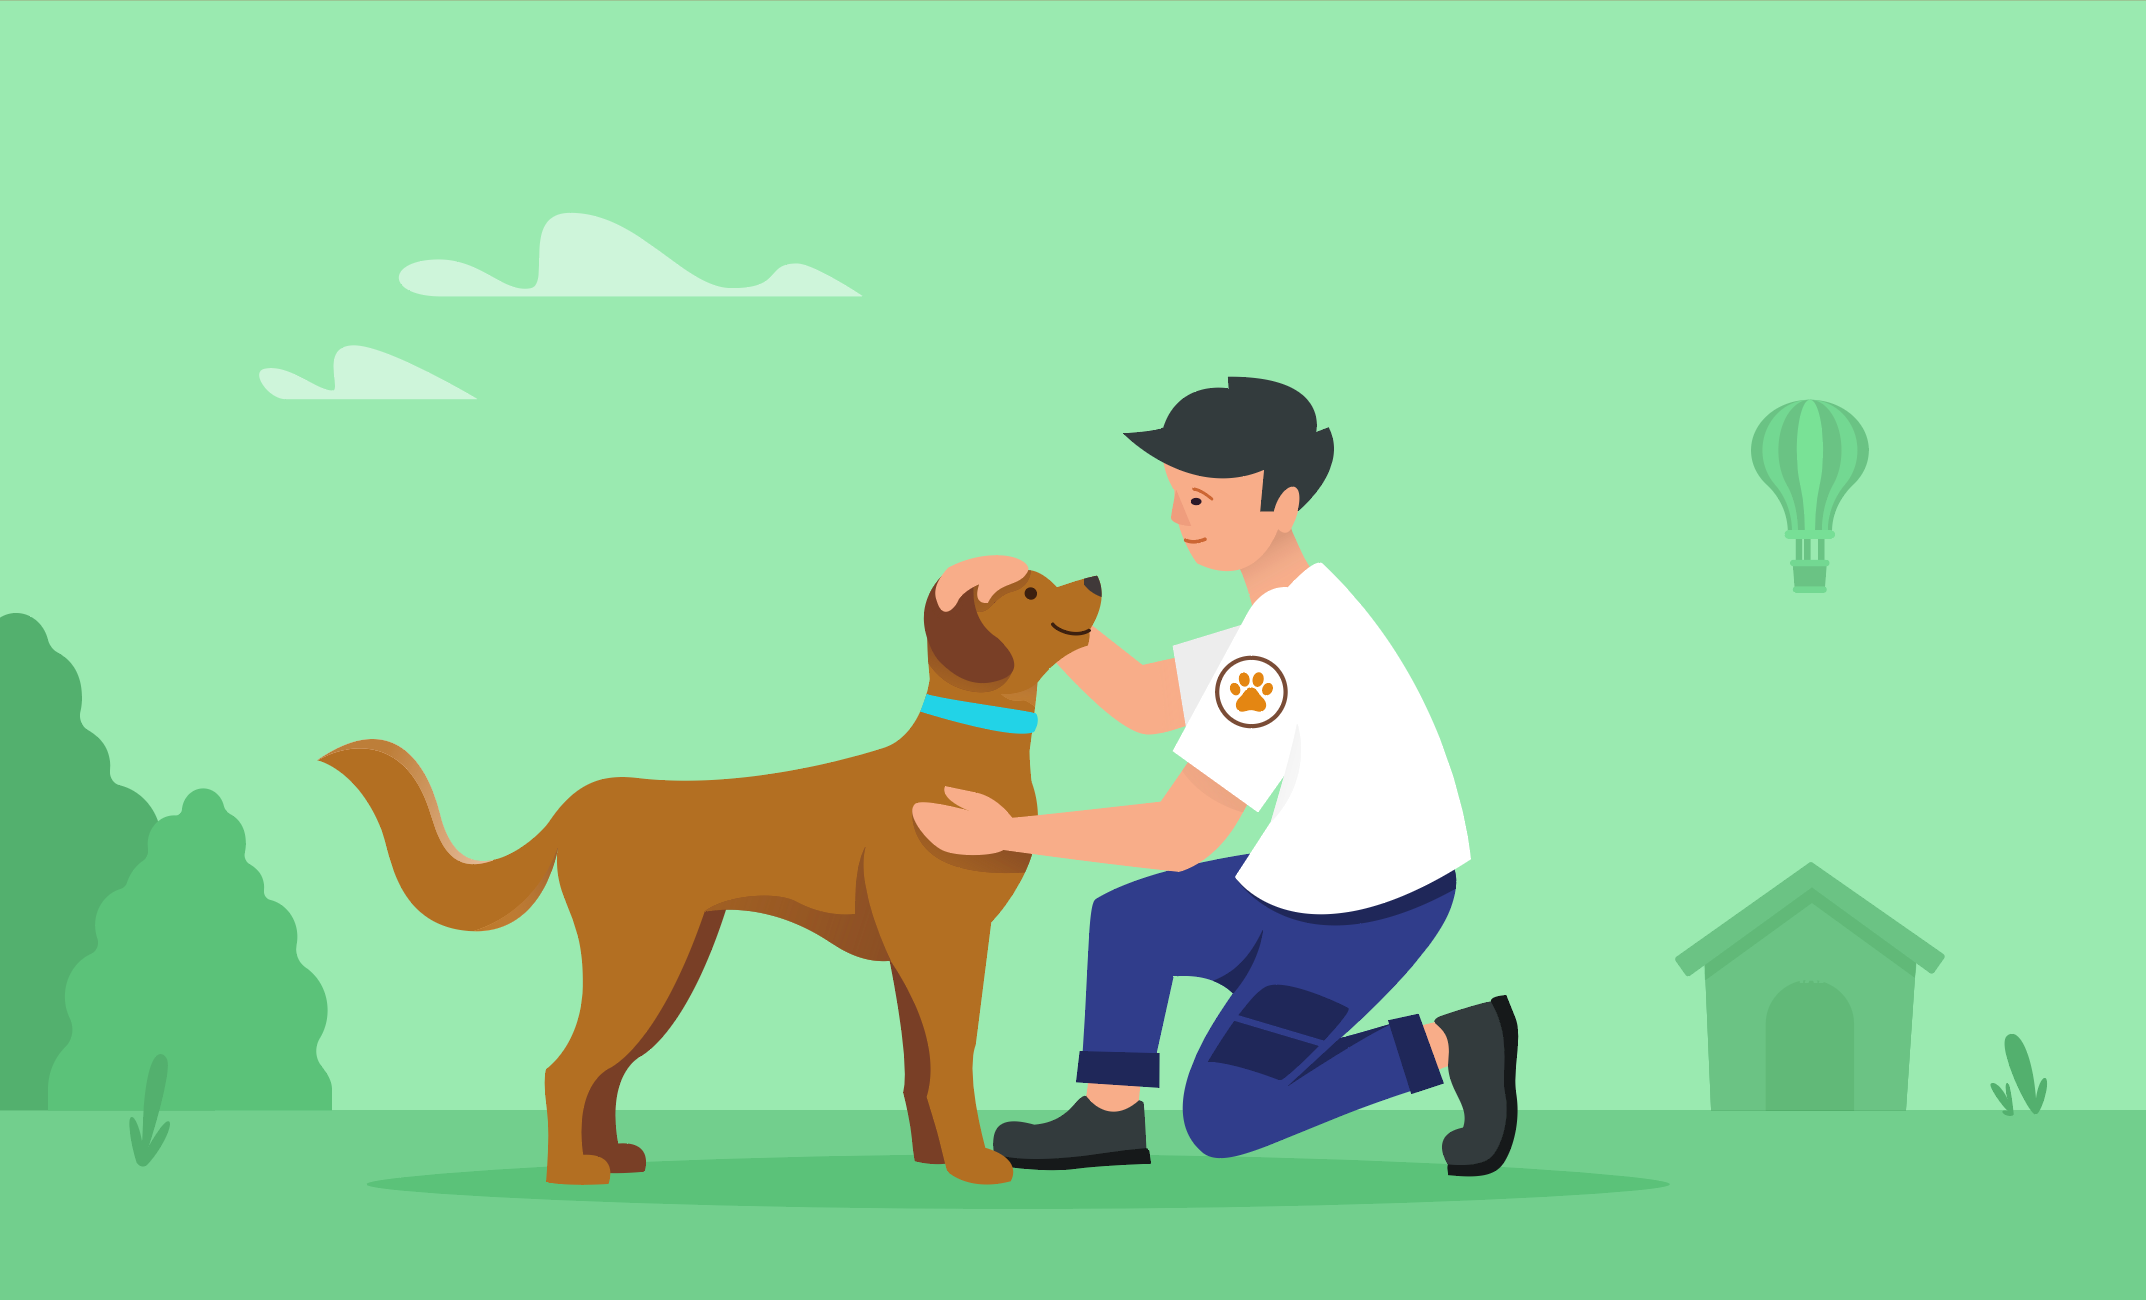 https://www.jotform.com/blog/wp-content/uploads/2019/09/How-to-Start-an-Animal-Rescue-featured.png